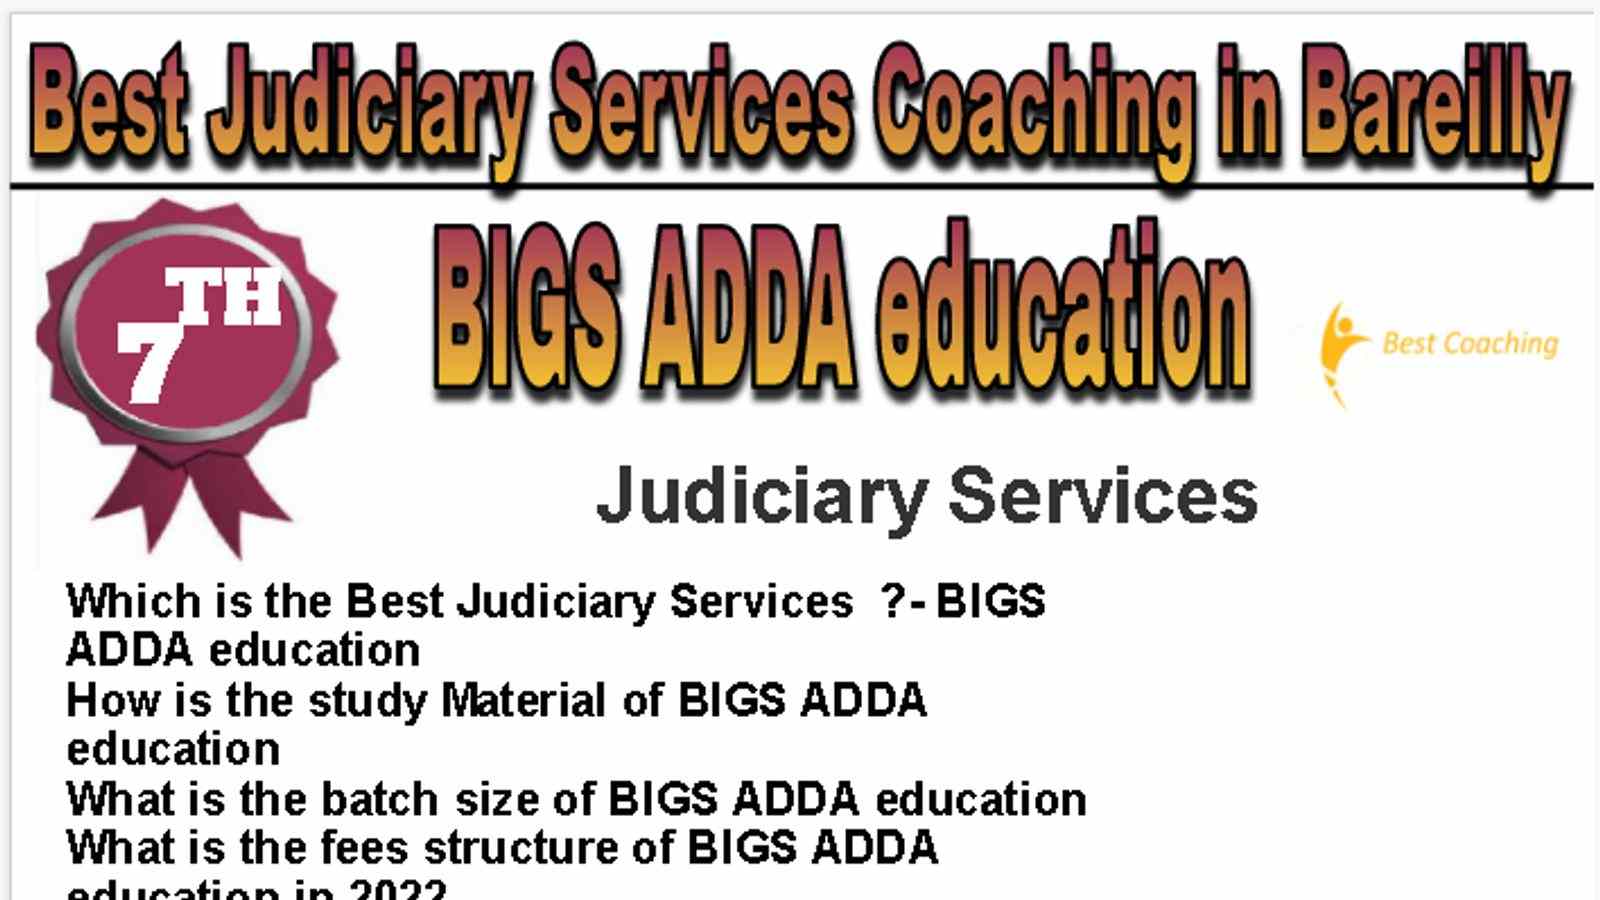 Rank 7 Best Judiciary Services Coaching in Bareilly